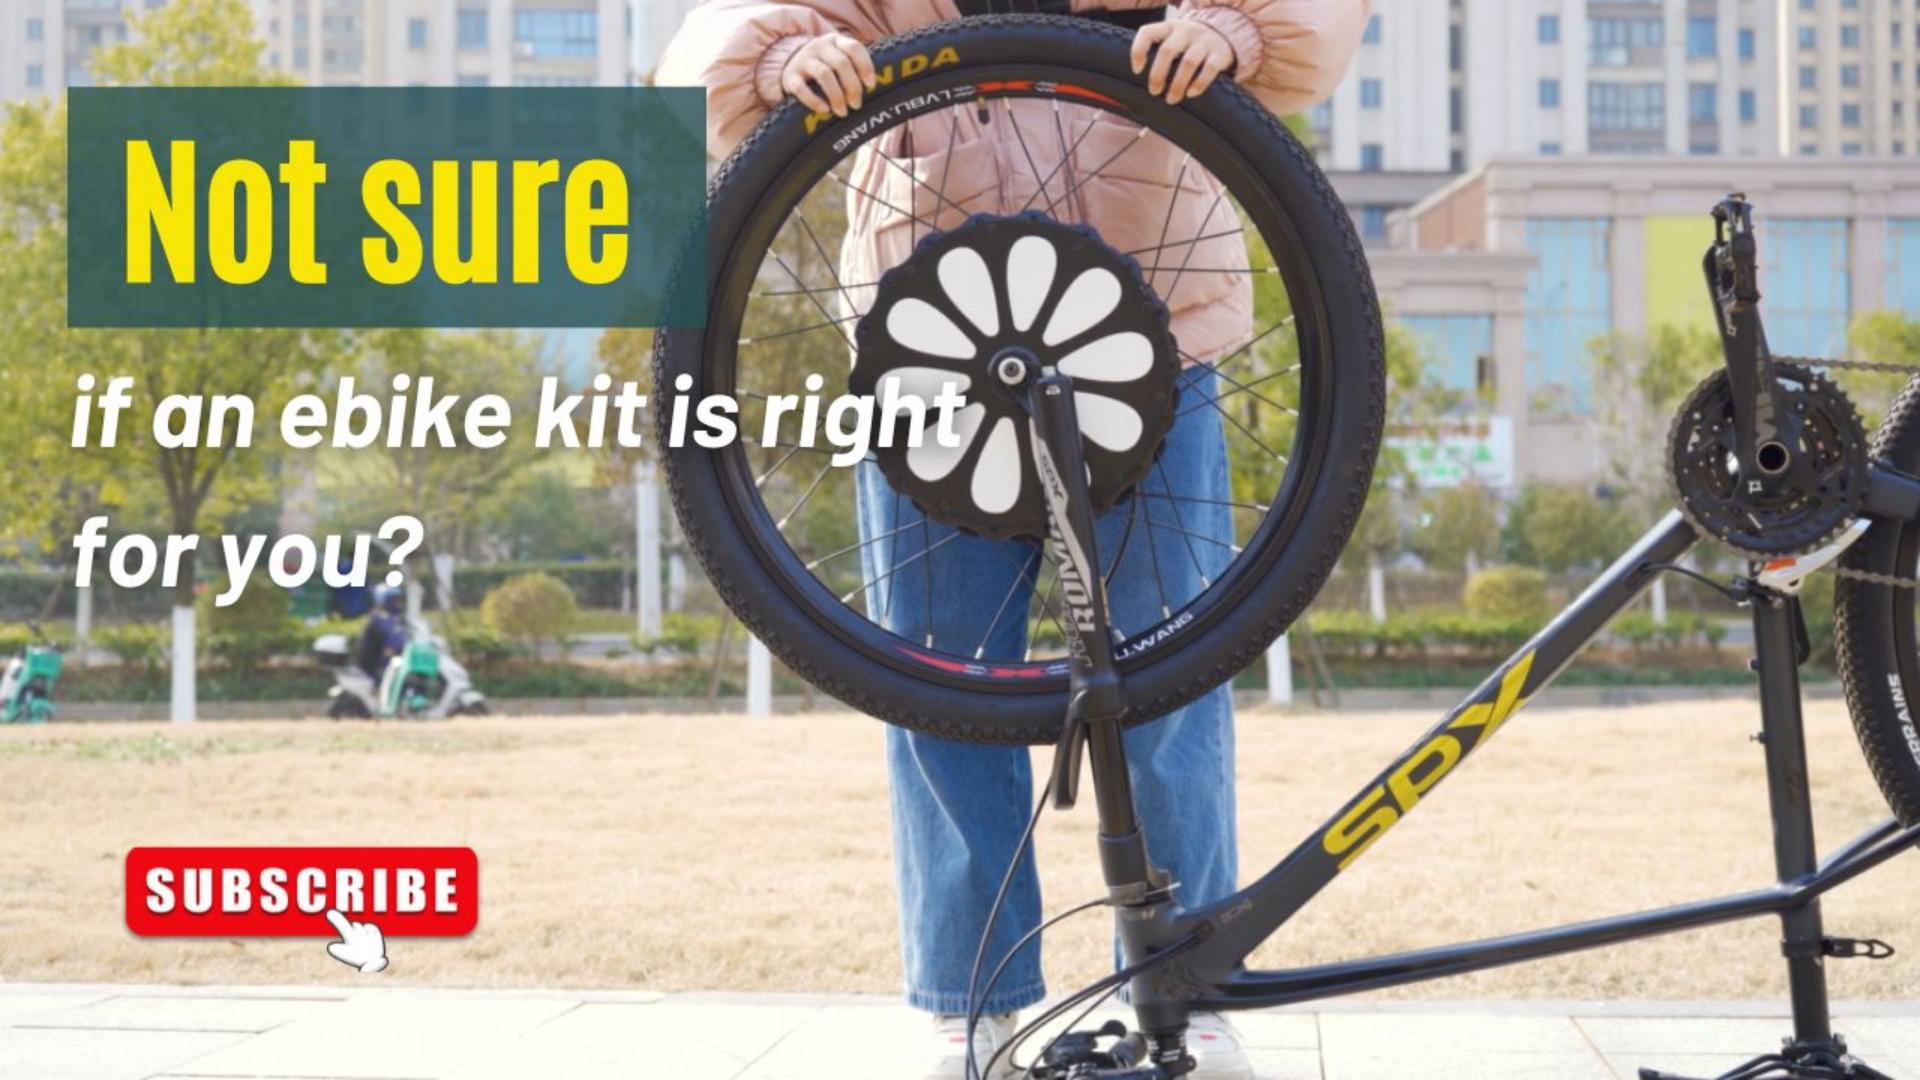 Not sure if an ebike kit is right for you?